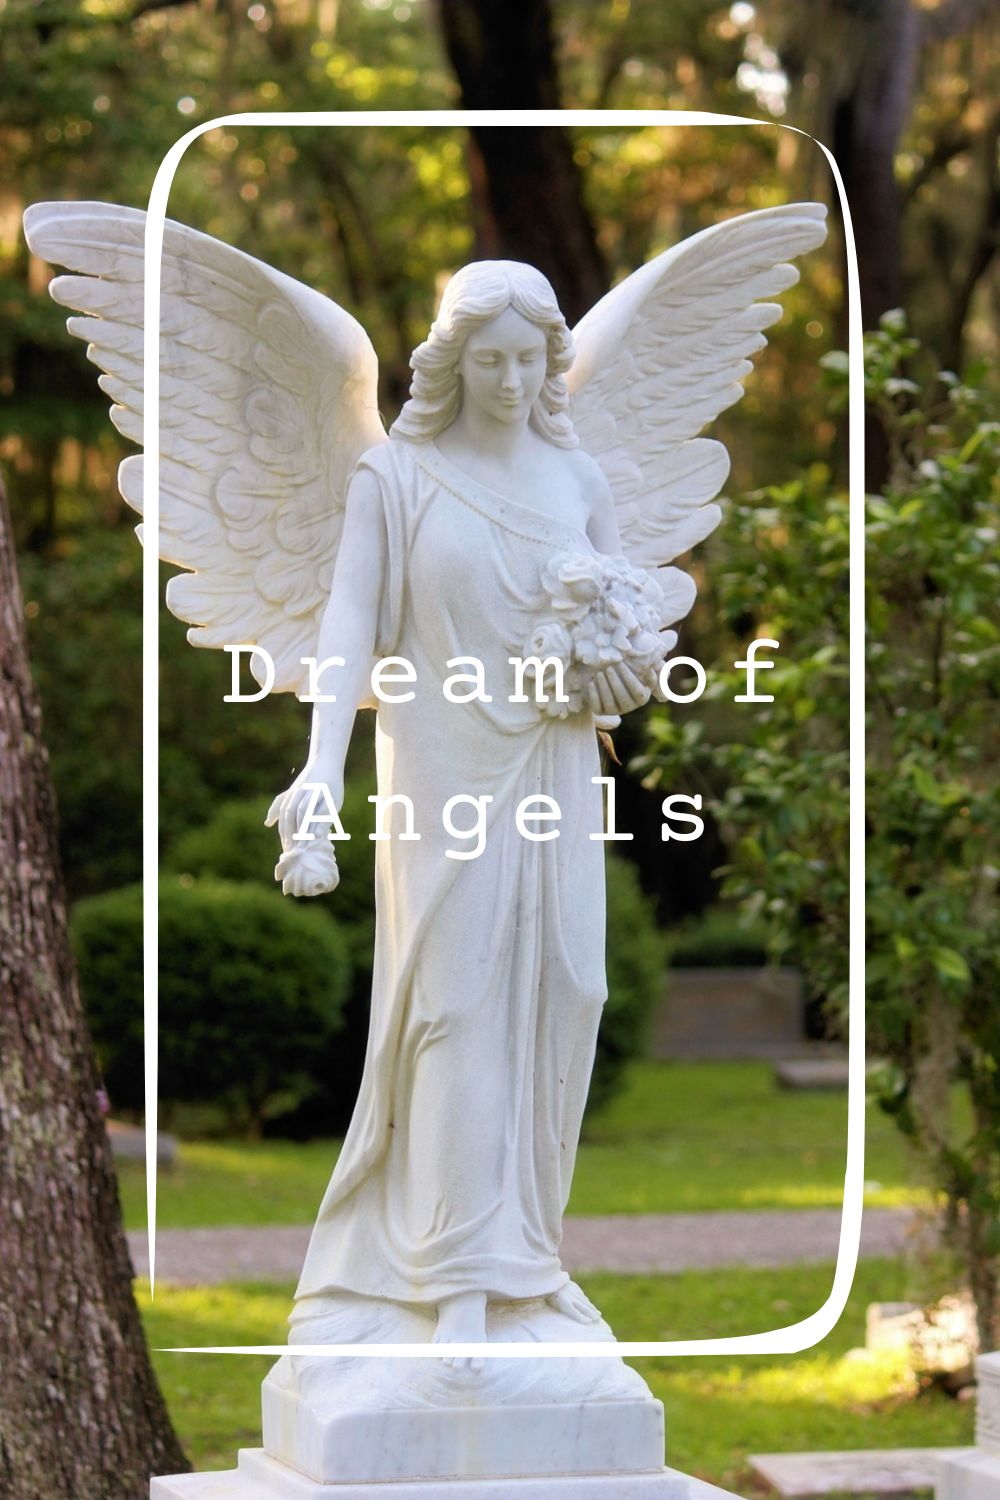 8 Dream of Angels Meanings4